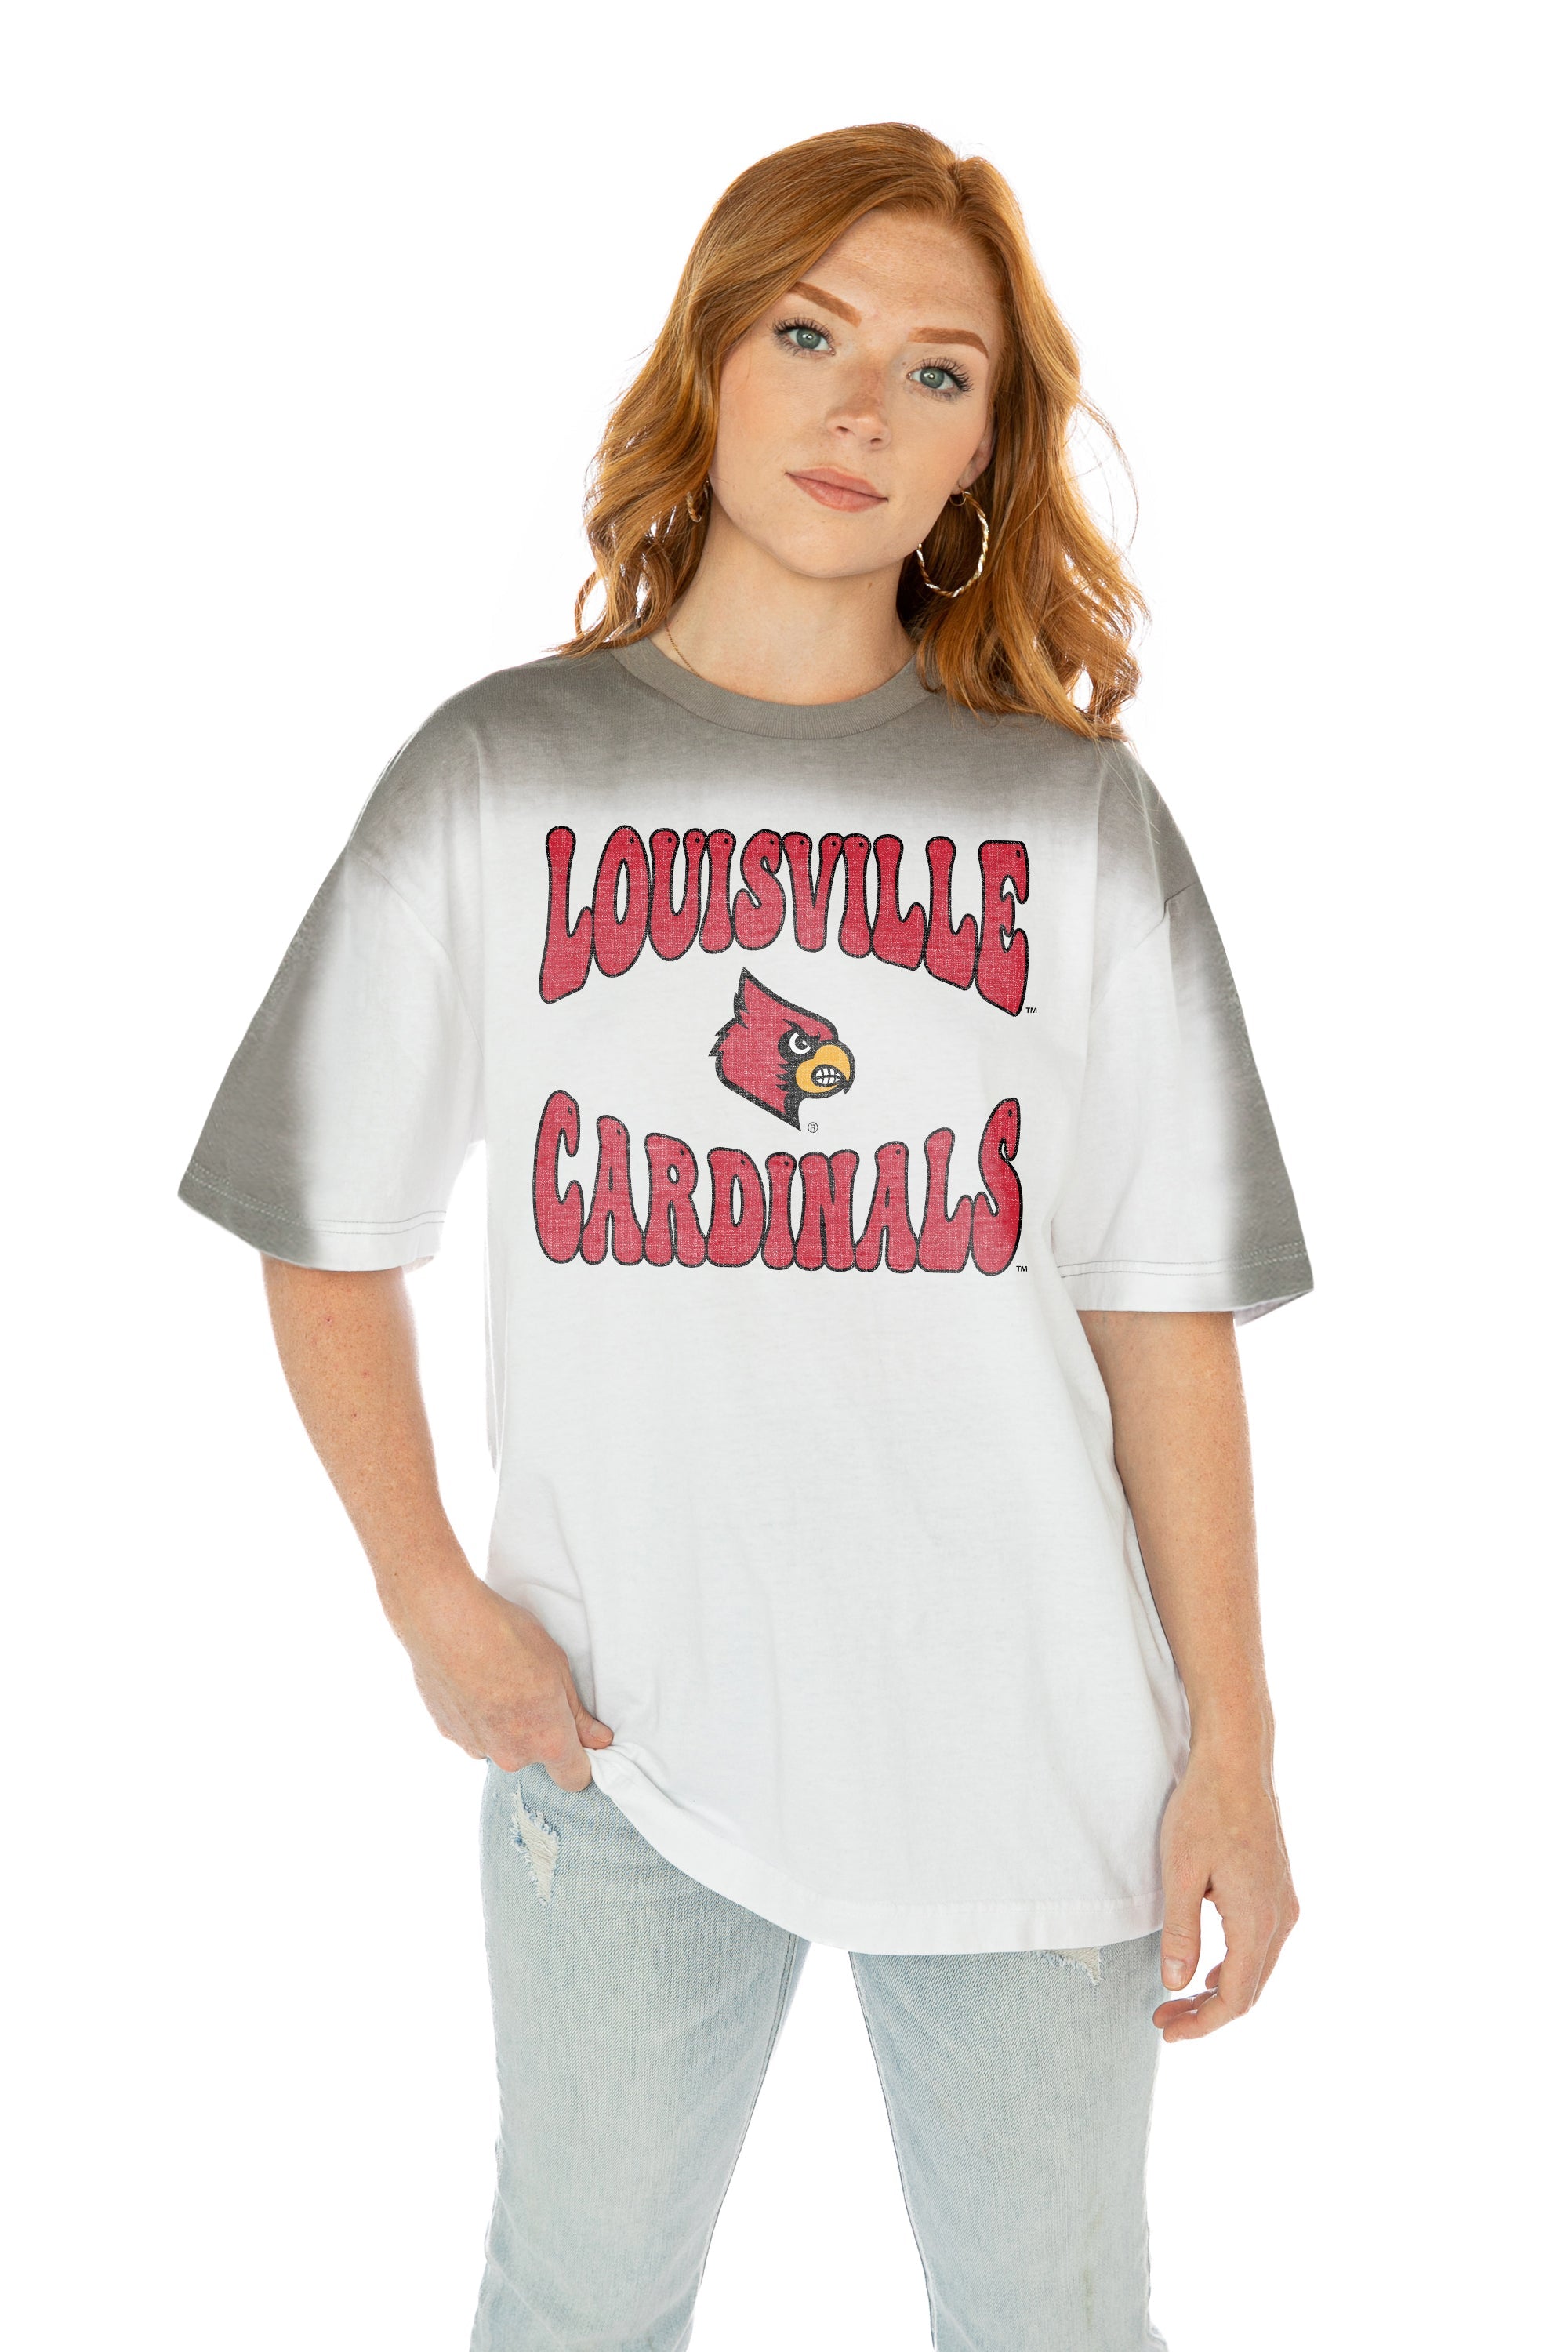 Louisville Cardinals Archives - My Gameday Store